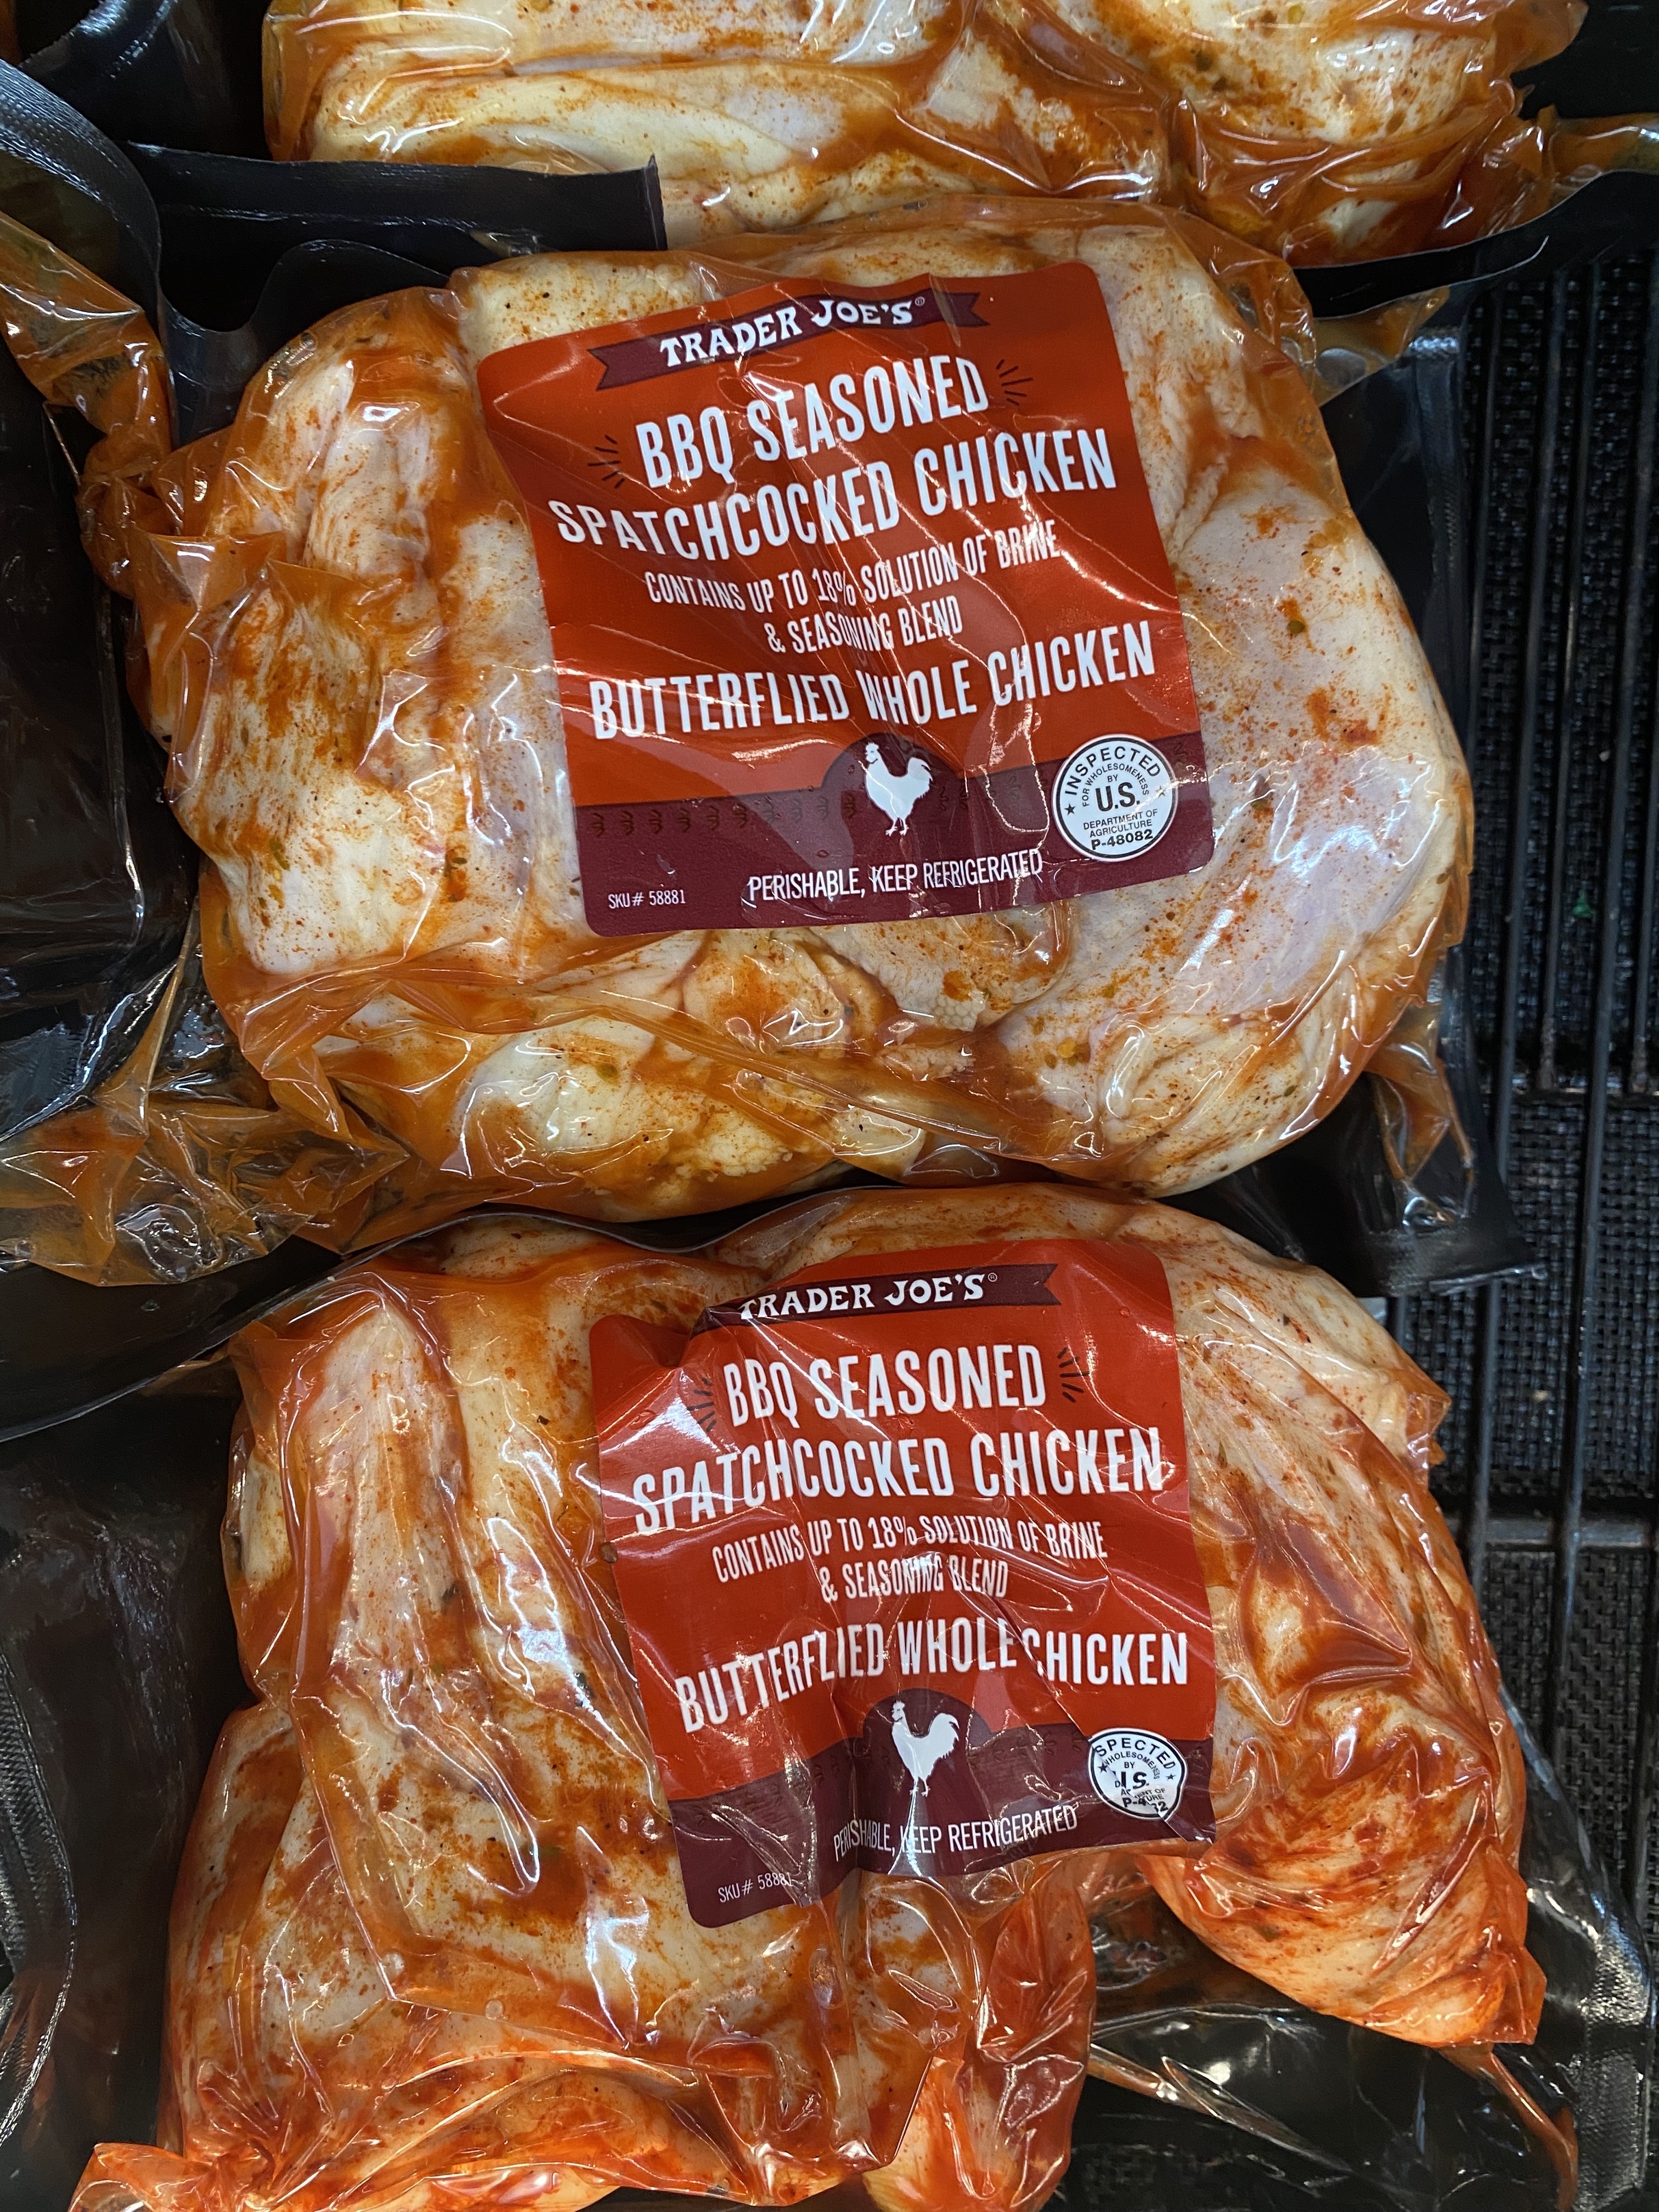 a package of bbq seasoned spatchcocked chicken